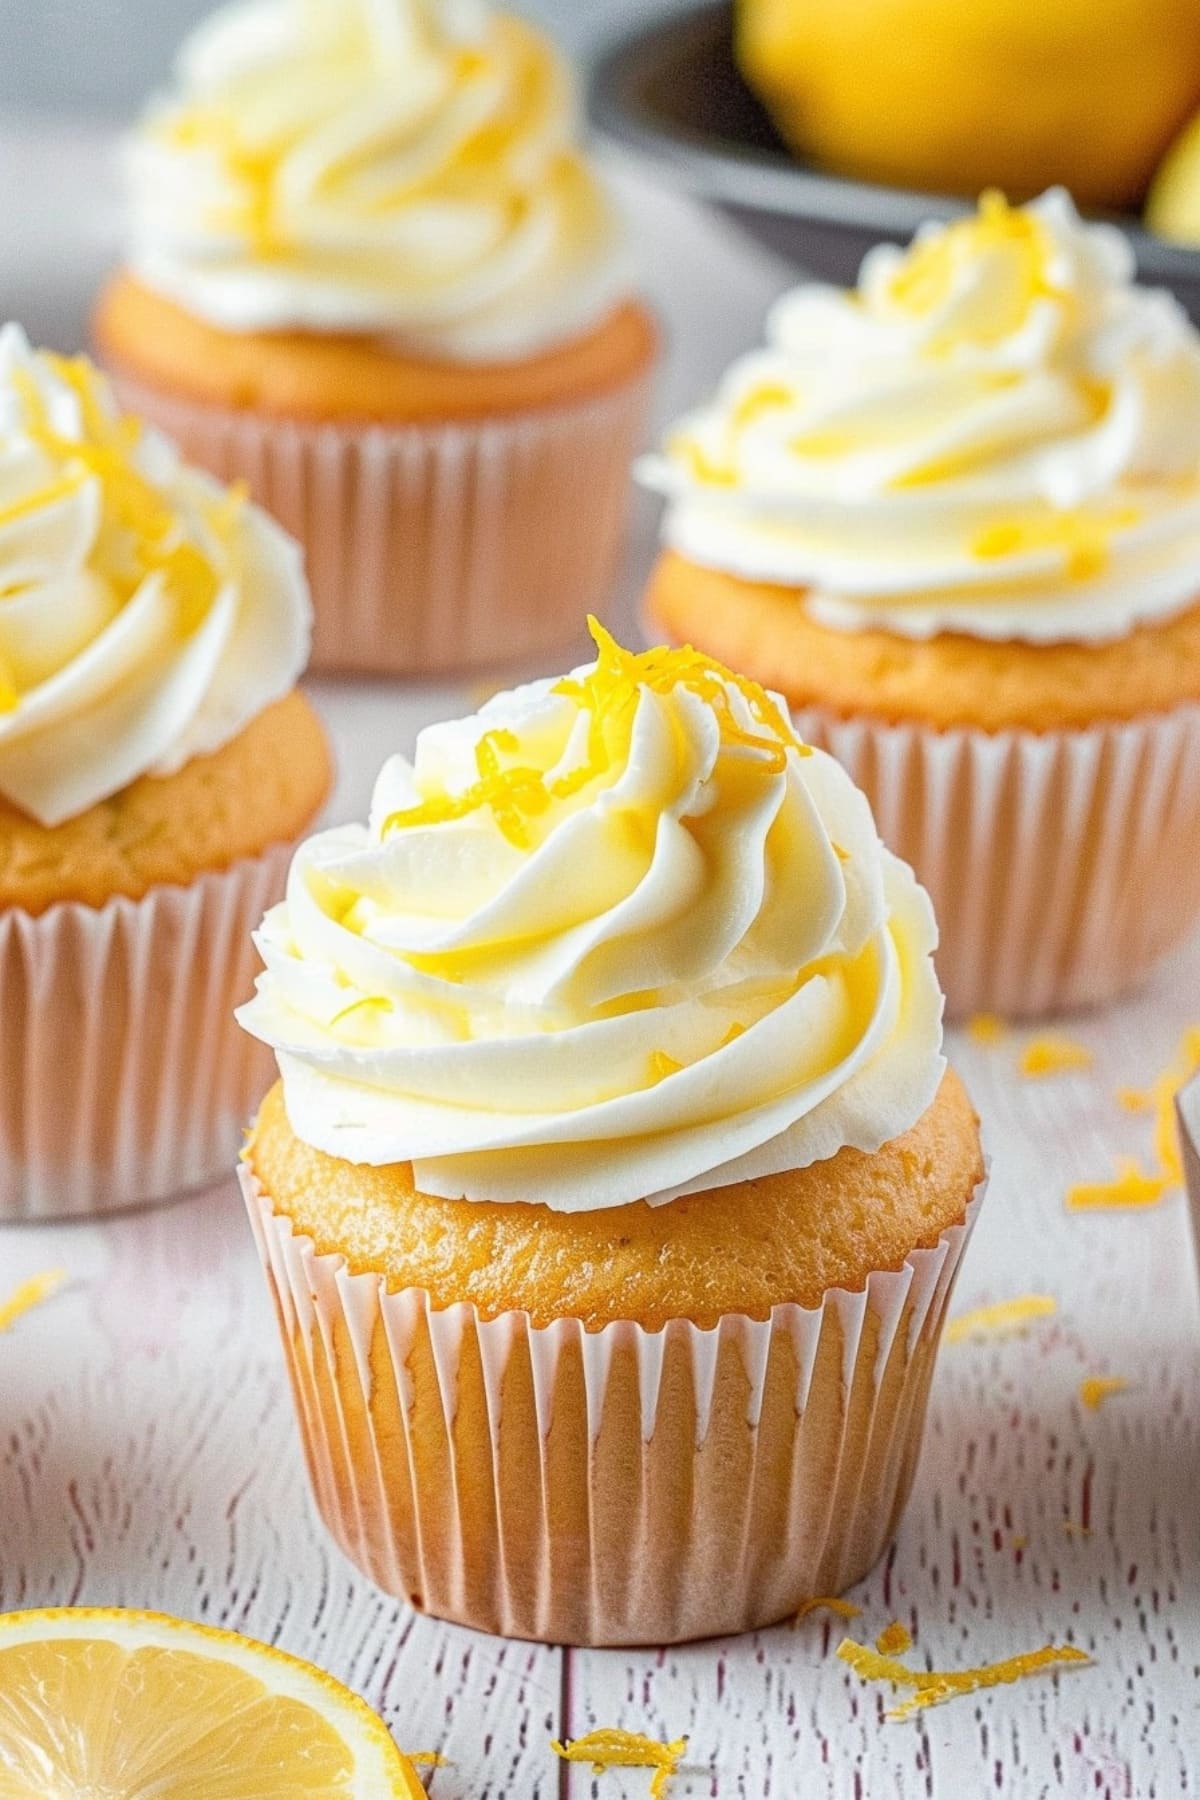 Cupcakes topped with lemon whipped cream garnished with lemon zest.